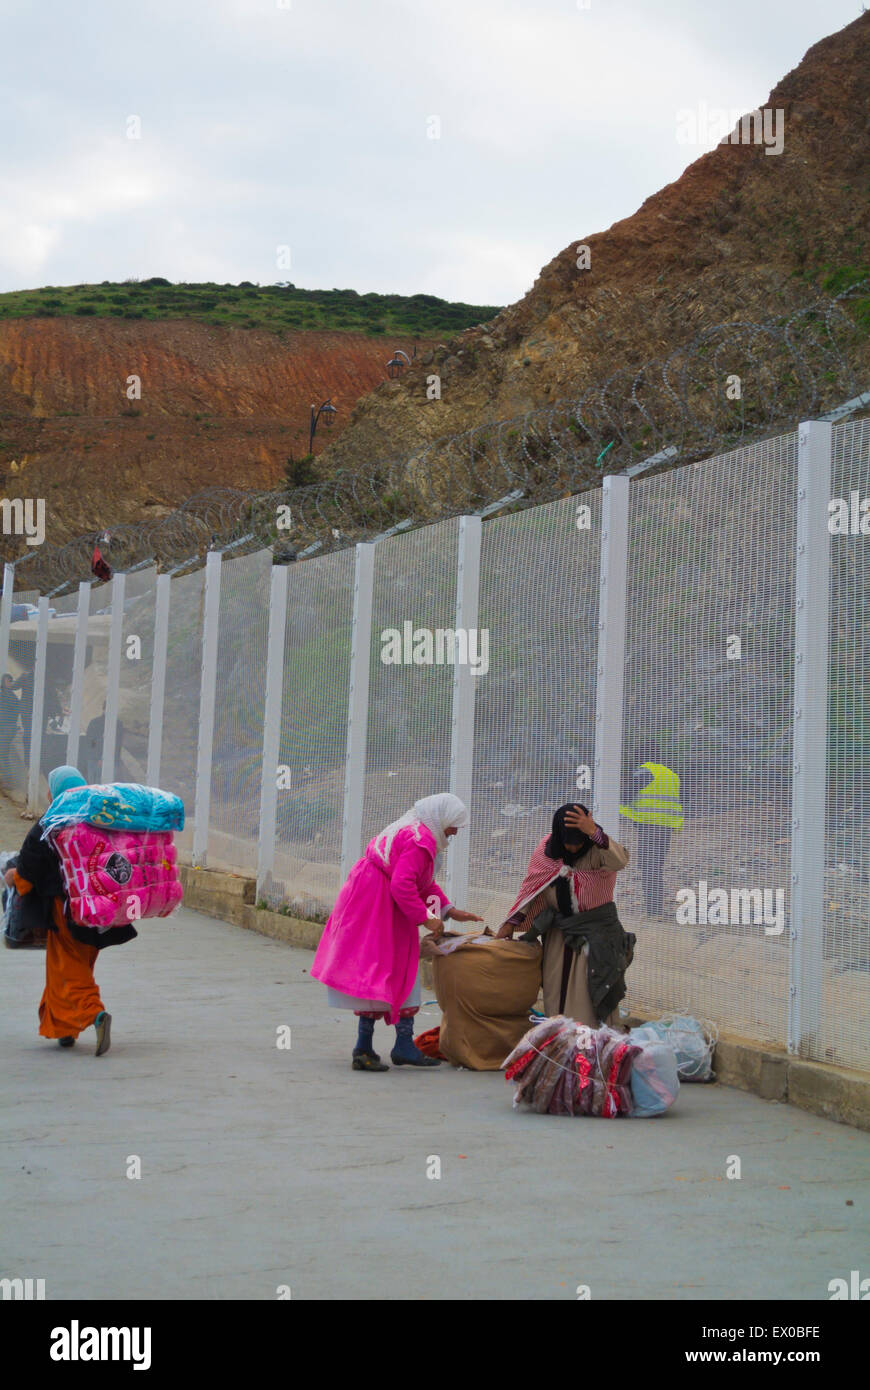 EU funded fence between Fnideq in Morocco and Spanish enclave of Ceuta, northern Africa Stock Photo